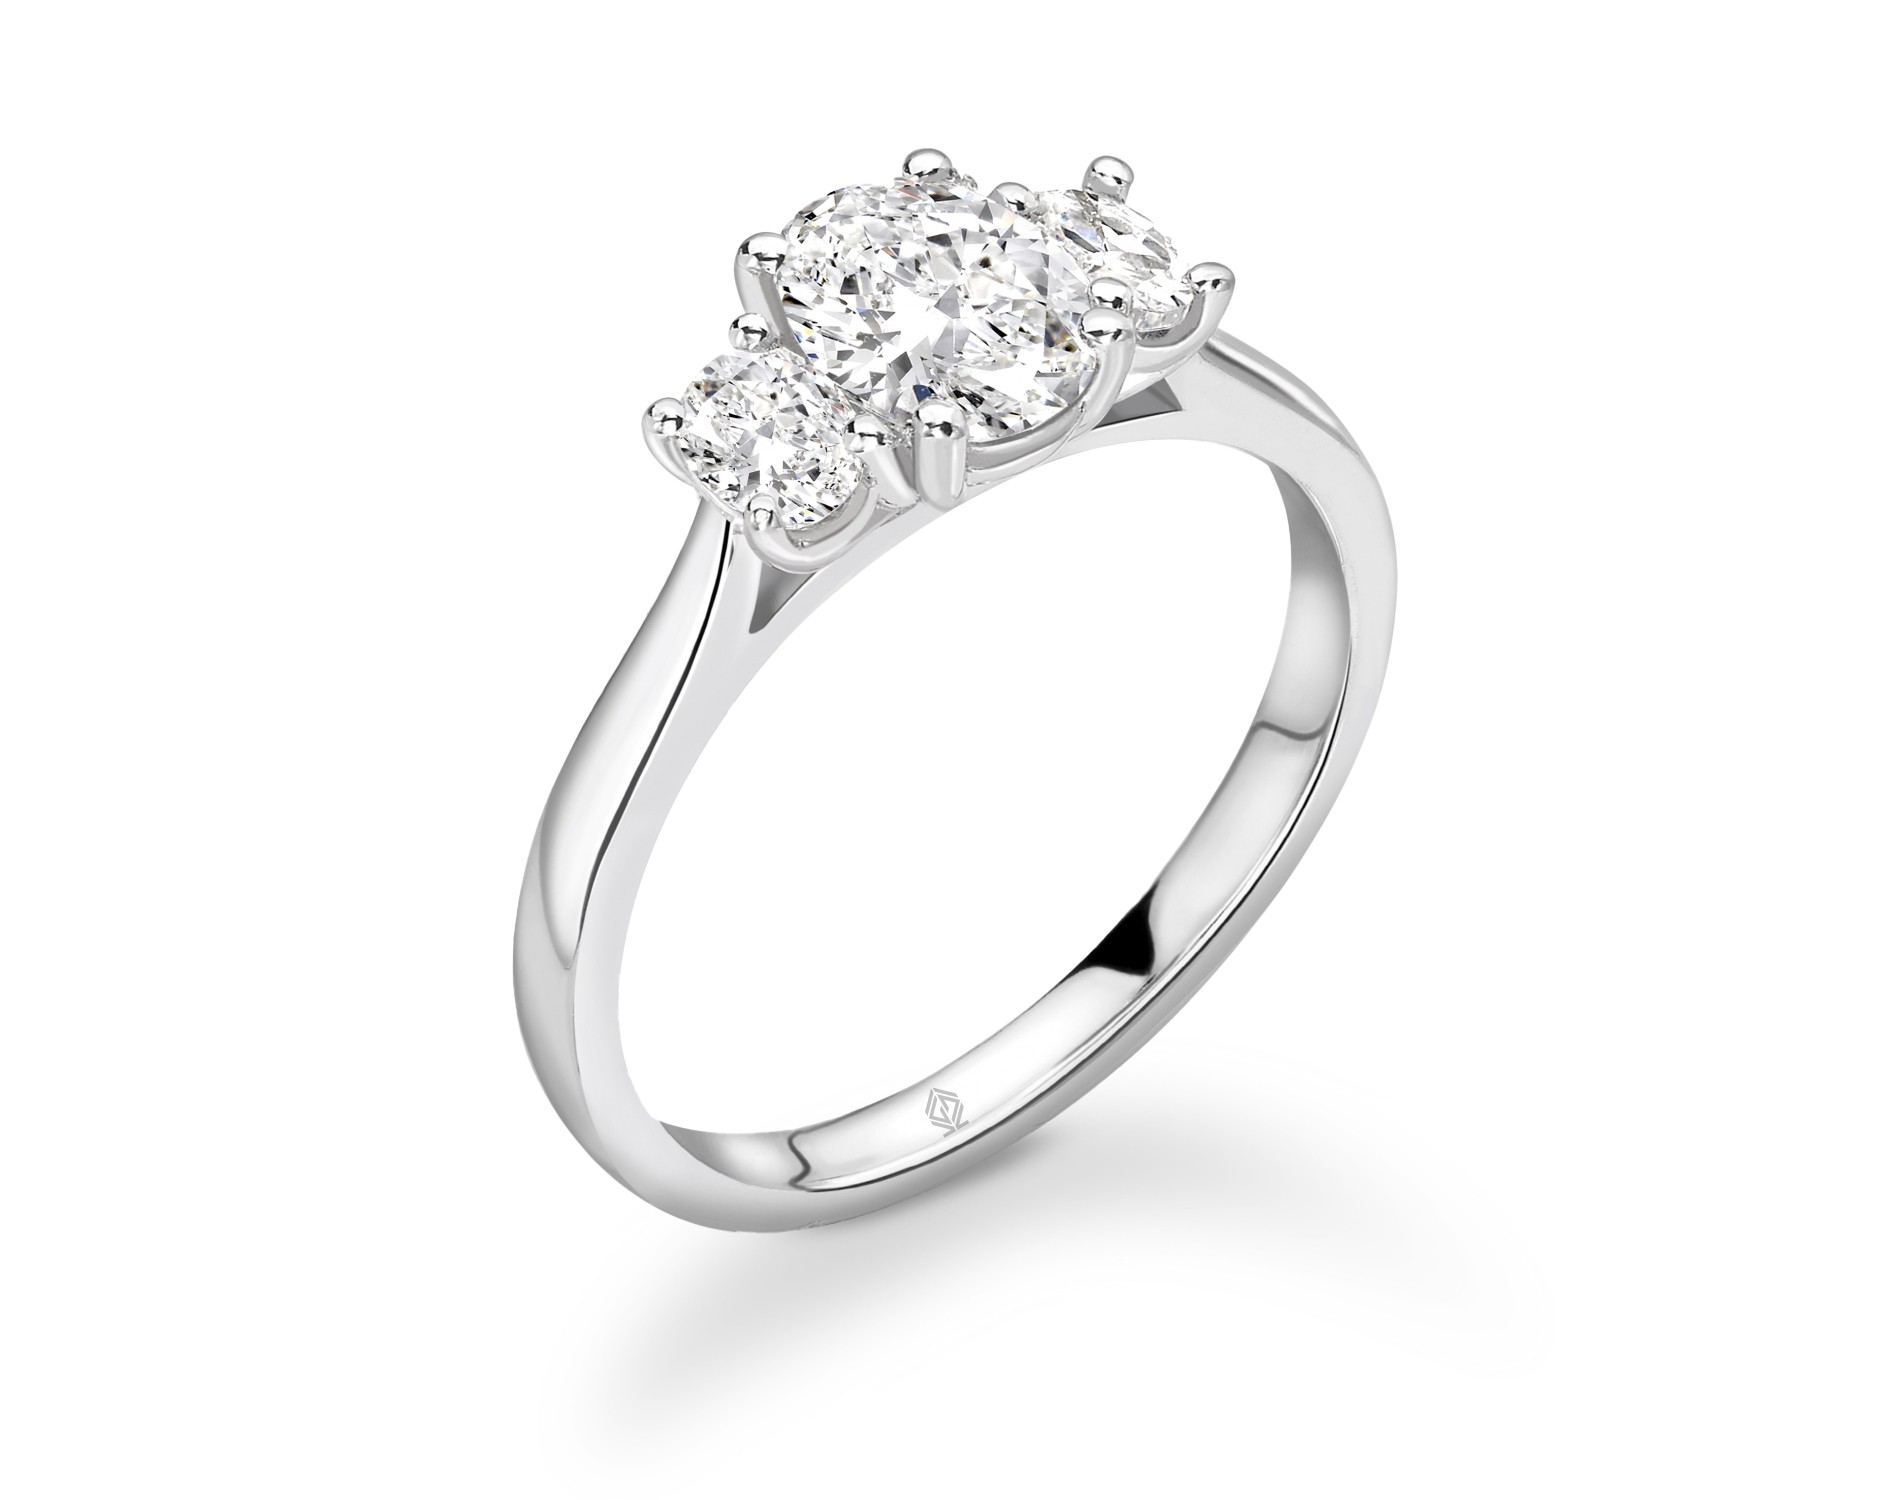 18K WHITE GOLD OVAL CUT TRILOGY DIAMOND ENGAGEMENT RING